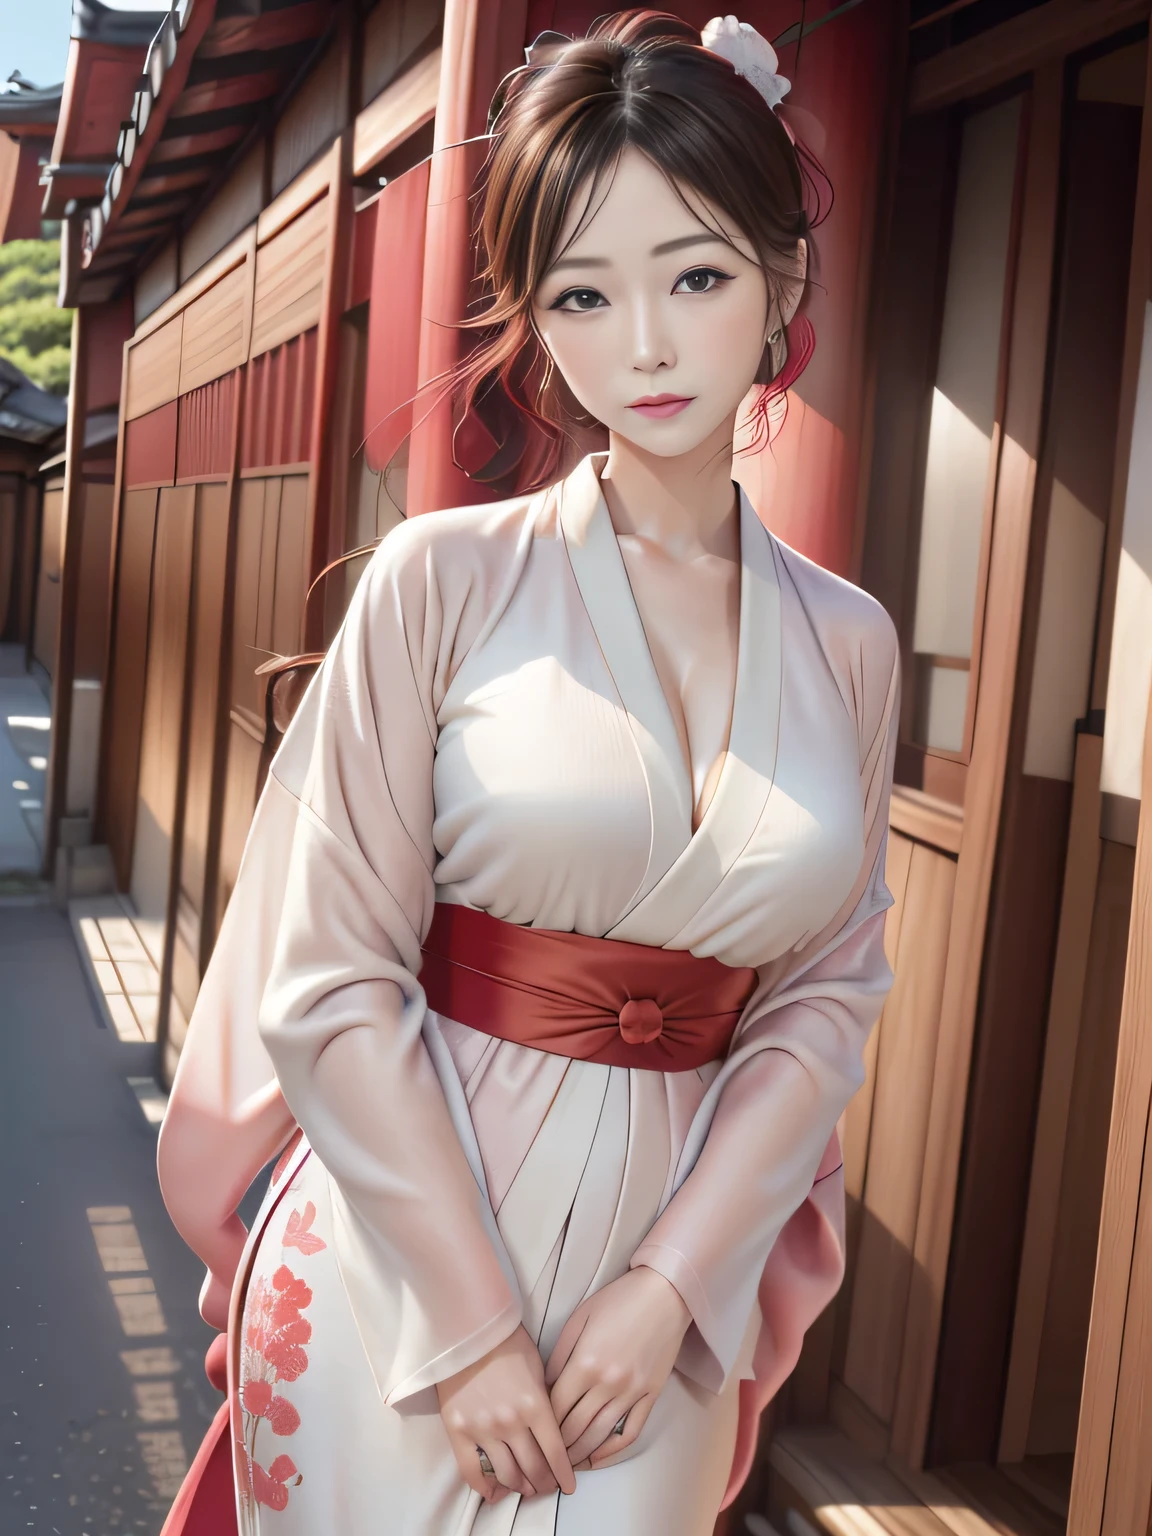 (New Year's scenery of Japan), ((in sfw)), 8k, ((table top)),(((highest quality))),((Super detailed)),((((realistic)))), Photoreal:1.37, (超Realistic), (enlightenment), (High resolution), (very detailed), (The best enlightenmentns), (Super detailed細), (wall), (detailed face), (beautiful expression), ((Details highest quality skins:1.2)), ((reddish blush)), (Super detailed background, detailed background), (beautiful and aesthetic: 1.2), very detailed, Super detailed thin pussy,beautiful girl, , Playfulness and charm. girl&#39; Kimono is carefully made, Flowing cloth fluttering in the wind. color soft pastel, Reminiscent of the wildflowers that surround her. With the main unit installed, Bring in light with intricate embroidery and beads. Kimono flows softly, With a layer of fabric that rustles softly as she moves,,,,. overall effect 、A piece that combines timeless elegance and elegance., Hiroko Takashiro, (mature woman, mature woman:1.1), alone, (curve:1.1), office, (full body shot:1.1), (redhead:1.05), long straight hair, lipstick, compensate, ultra detail hair, 超detailed face, (purple eyes:1.05), perfect eyes, perfect face, earrings, ((fine eyes, glossy lips, fine-textured skin)), Big breasts that are about to burst, deep cleavage, (reddish blush),, Woman in Kimono:1.5, ((from the front)),((M-shaped legs)), ((put your palms together in front of your face)), A woman wearing a kimono and standing bare skin, (kimono with embroidery), ((Cute kimono)), ((girl&#39;hair wrapped with hairpins)), Kadomatsu City, Komainu, red torii, large company, Customers praying, gorgeous new year decorations, large company decorated with gold leaf, At the shrine shining in the morning sun